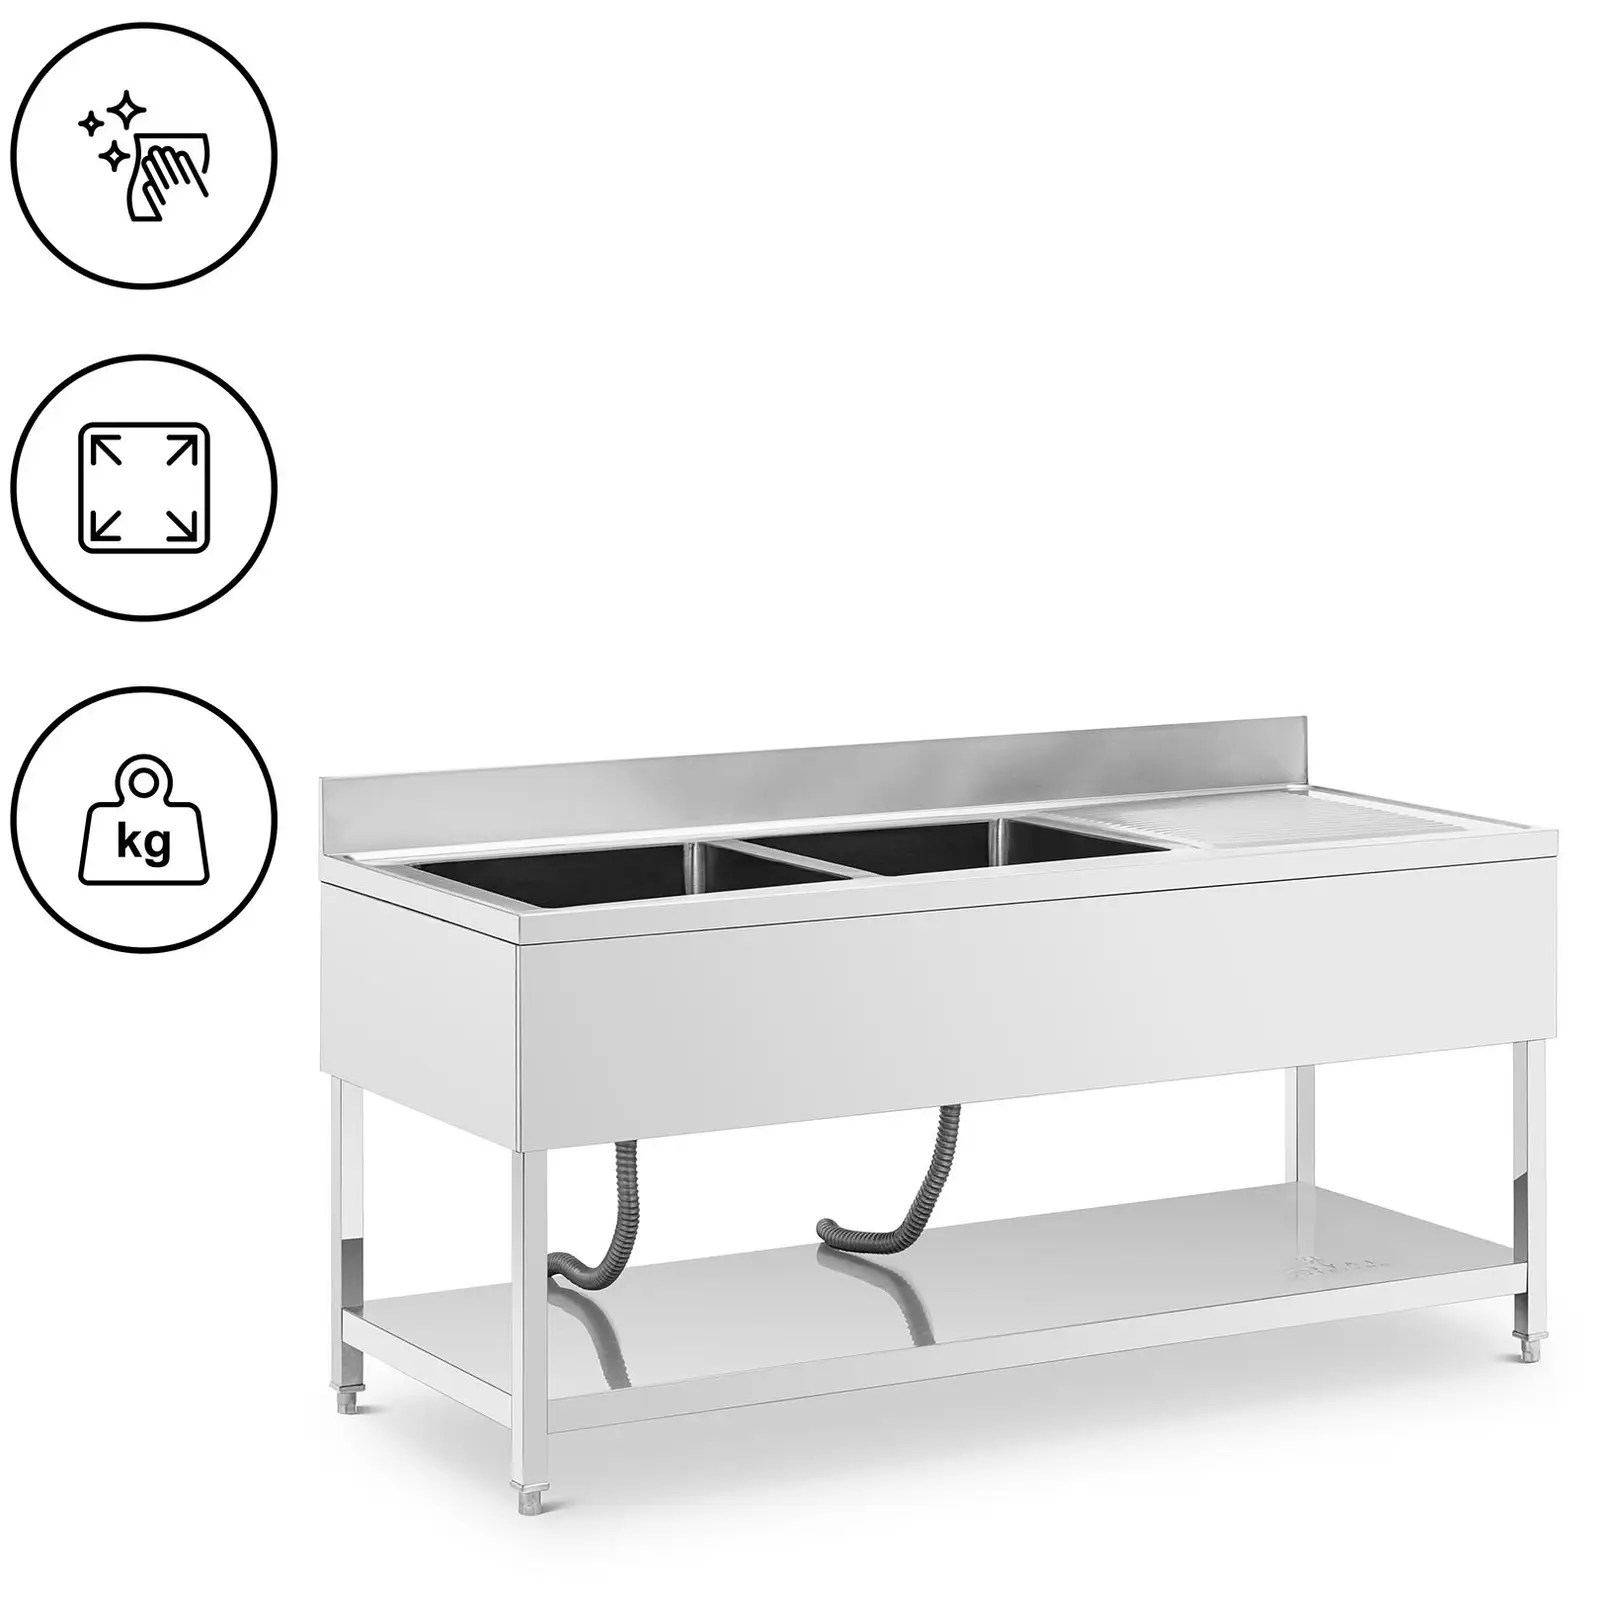 Sink Unit - 2 basins - stainless steel - 180 x 70 x 97 cm - Royal Catering